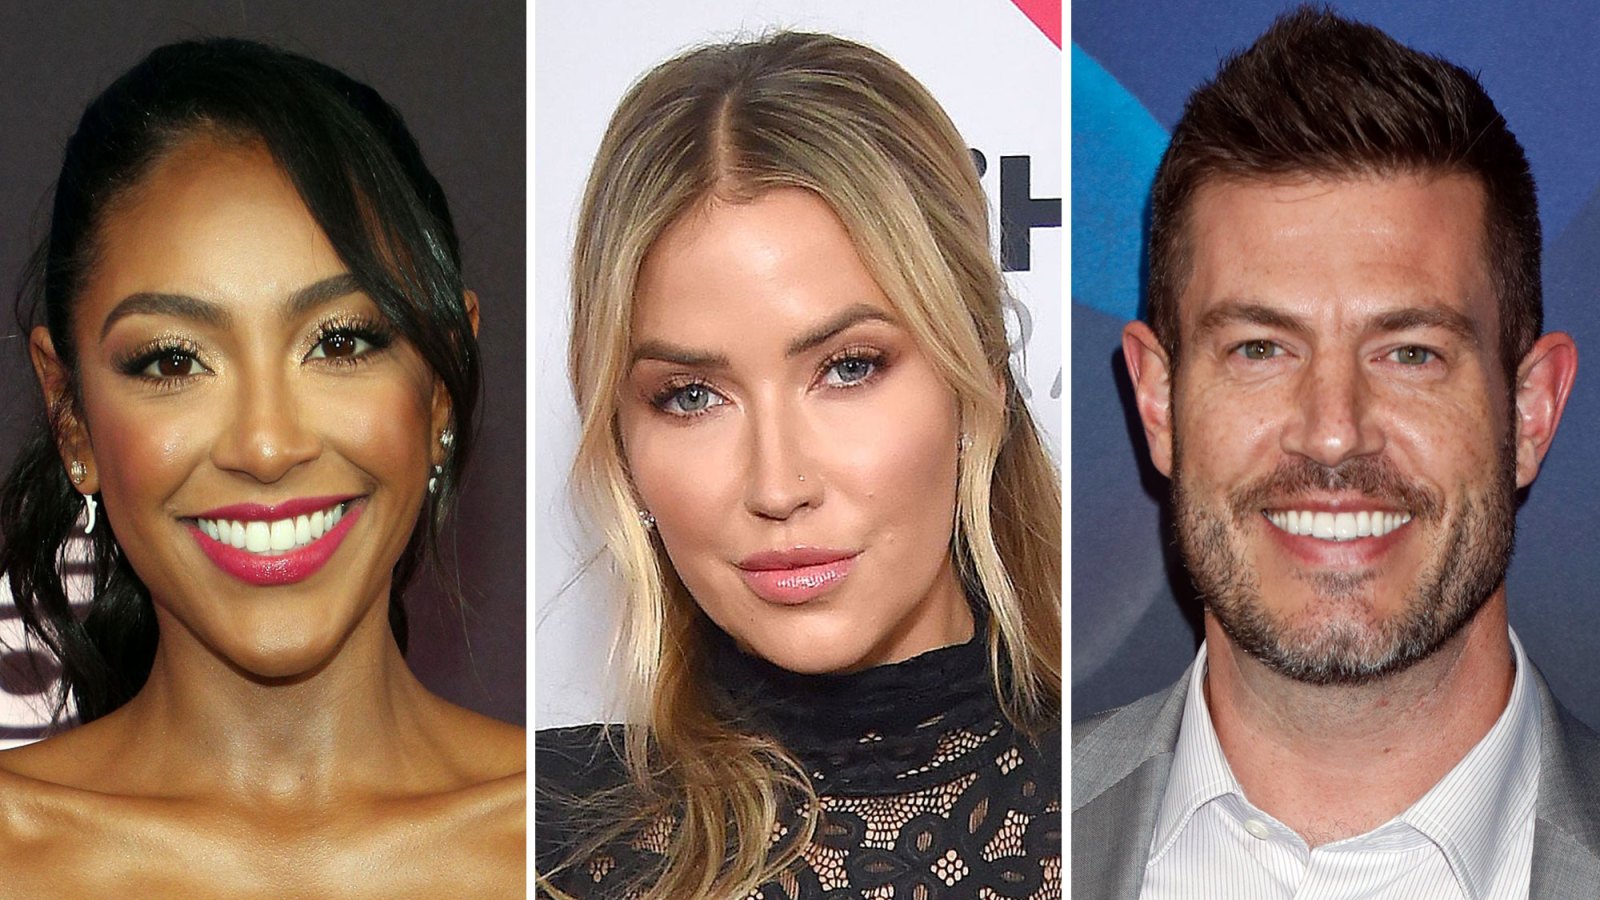 Tayshia Adams and Kaitlyn Bristowe Remove Bachelorette Cohost Titles From Instagram Bios After Jesse Palmer Takes Over Season 19 Gig